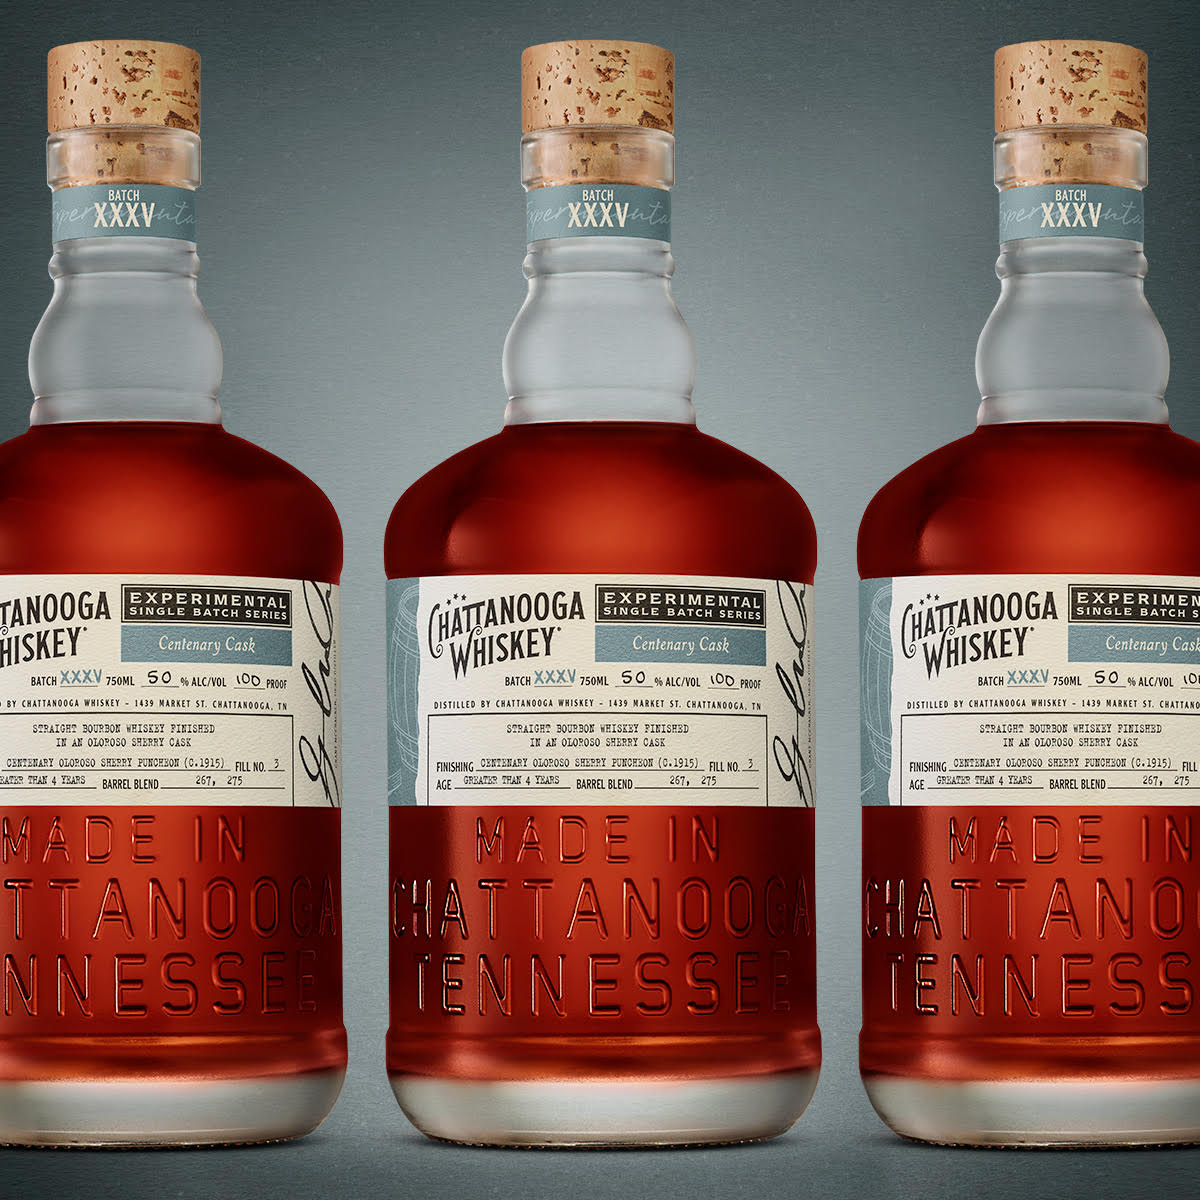 The Manual: Chattanooga Whiskey’s latest experimental single-batch whiskey is finished in a 100-year-old Sherry cask